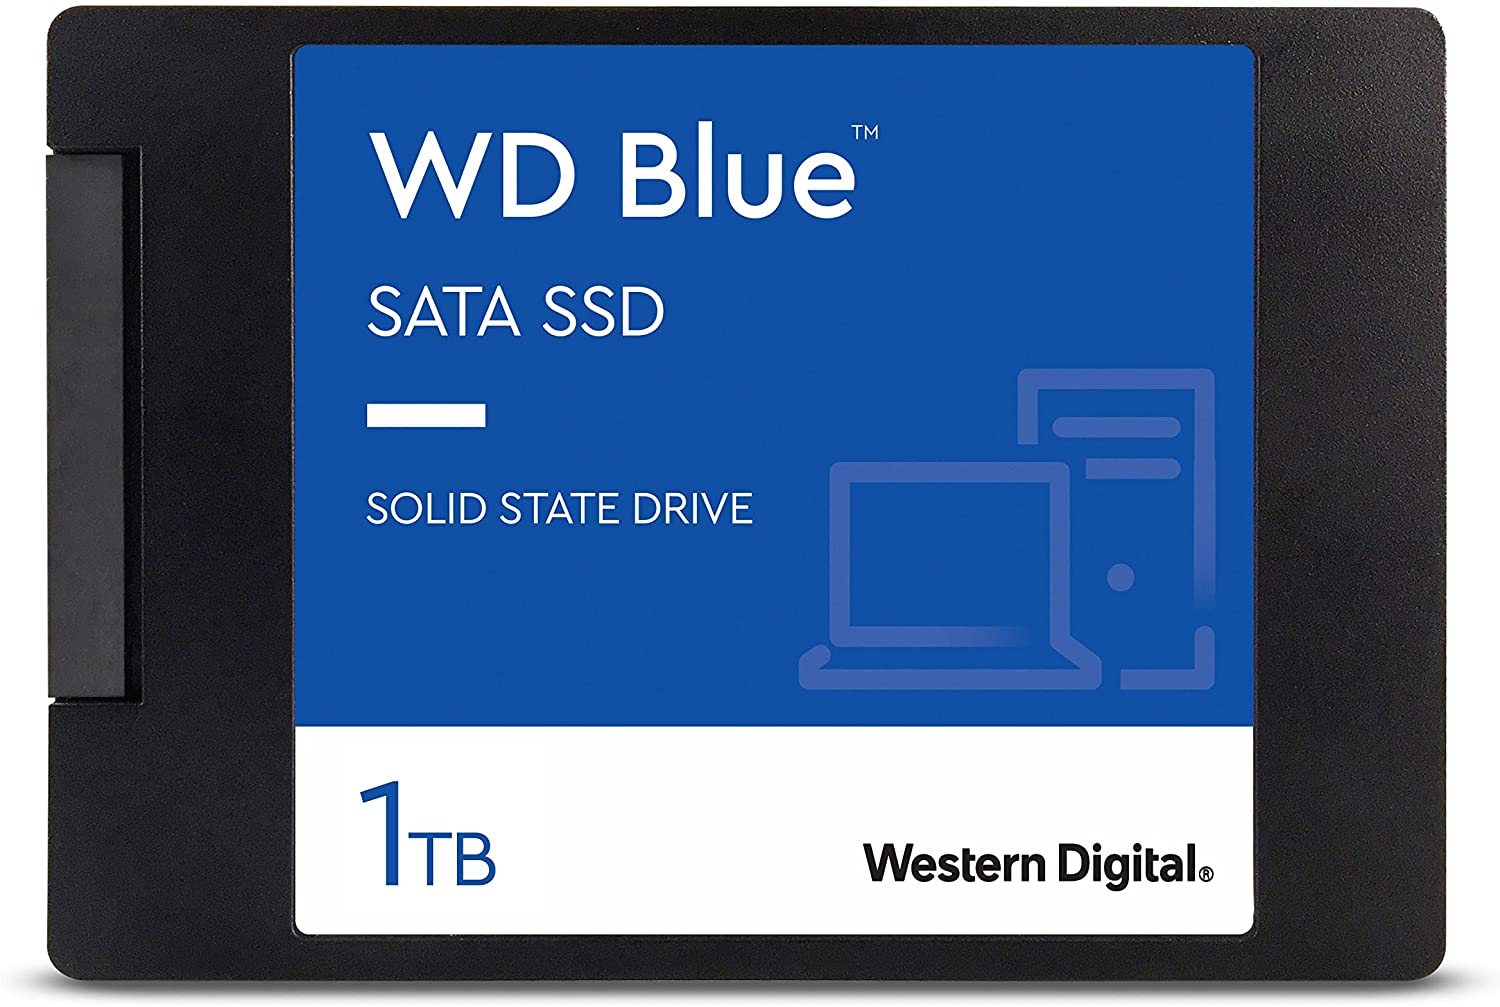 WD Blue 3D NAND Internal PC SSD - SATA III 6 Gb/s, 2.5"/7mm, Up to 560 MB/s